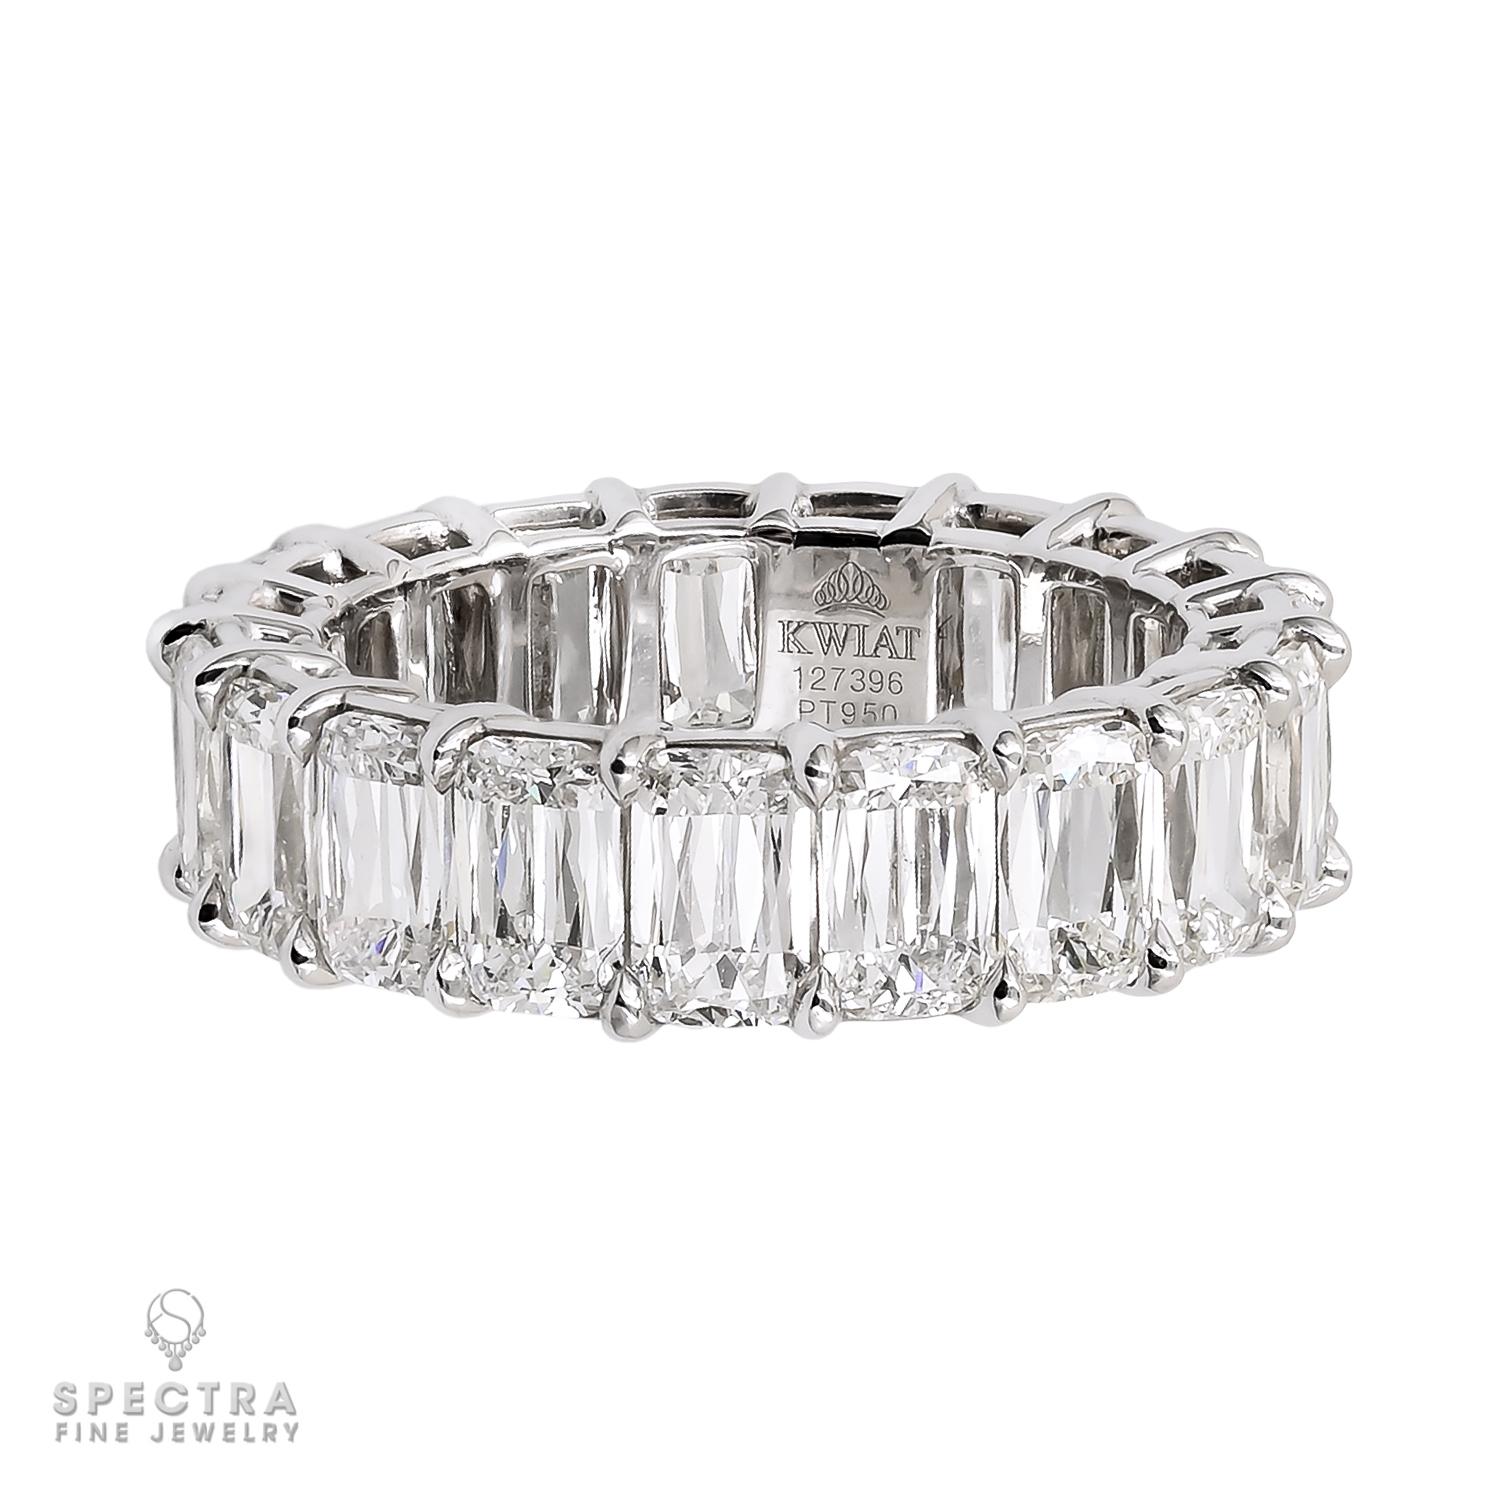 Crafted by Kwiat, the Cushion-cut Diamond Platinum Eternity Wedding Band is a modern masterpiece symbolizing enduring love. Featuring 19 modified cushion-cut (also known in the trade as ashoka-cut) diamonds totaling around 5.60 carats, each diamond,